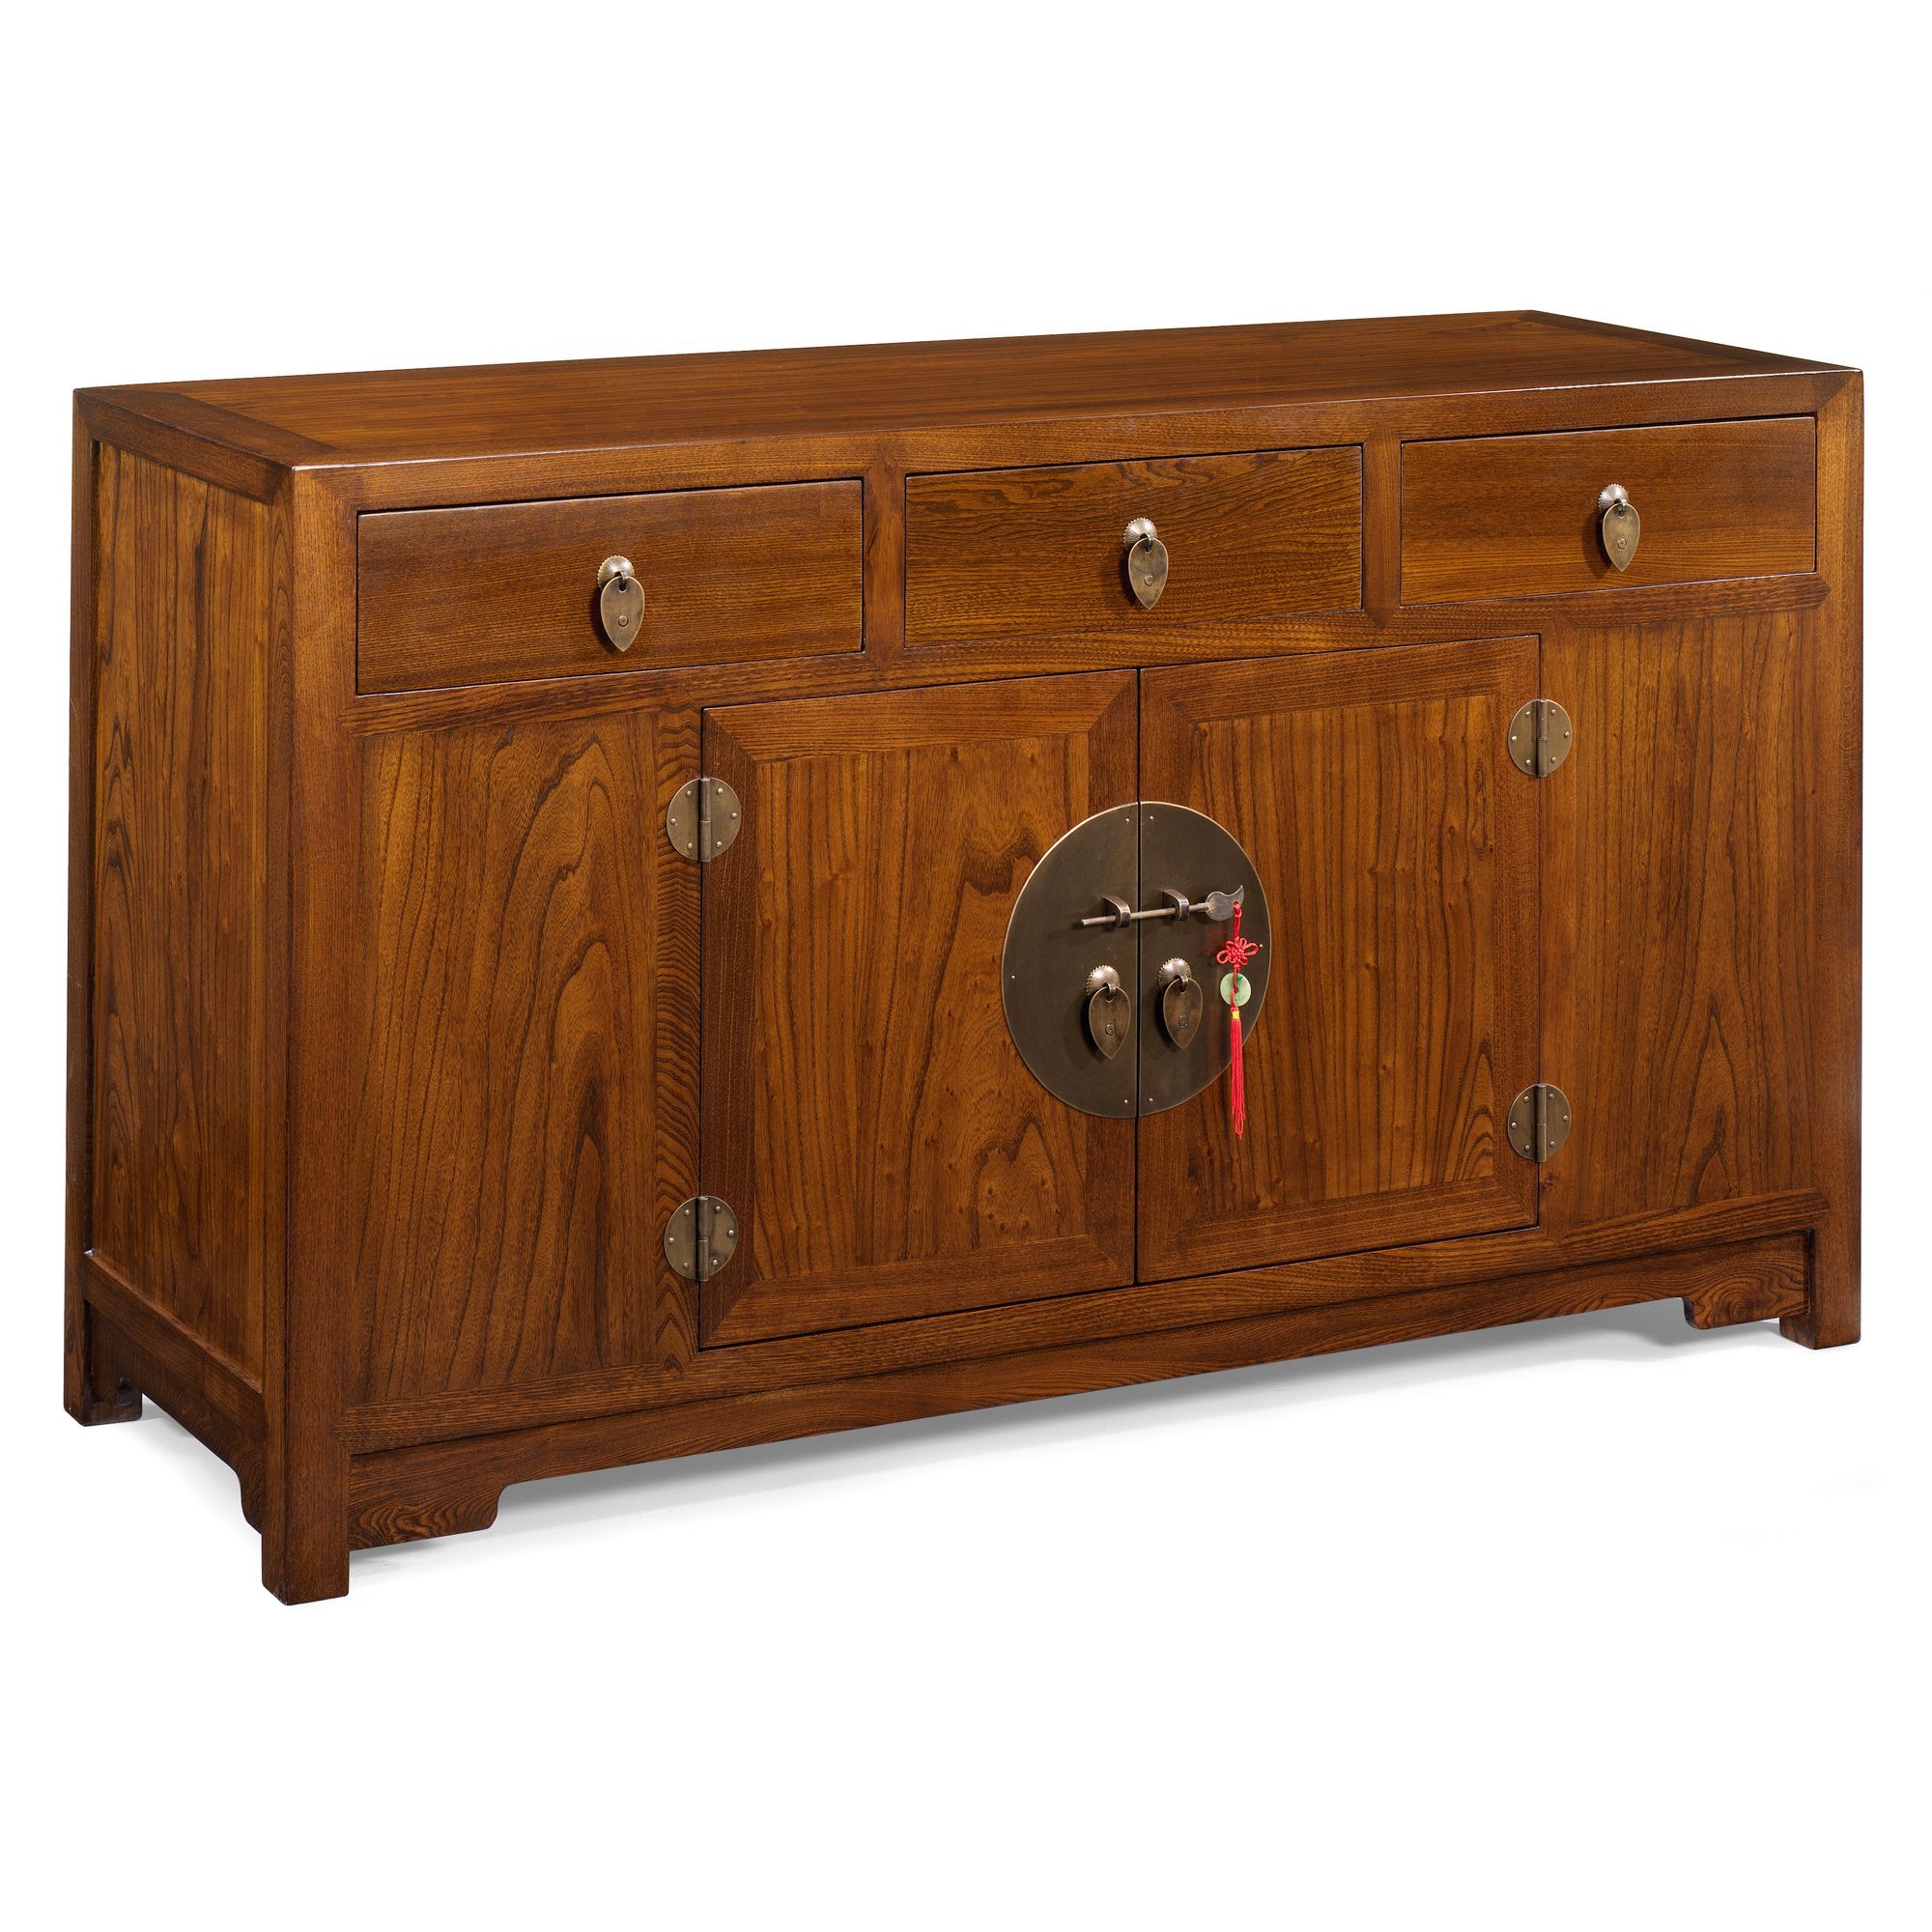 Shimu Chinese Classical Ming Sideboard - Warm Elm at Tesco Direct